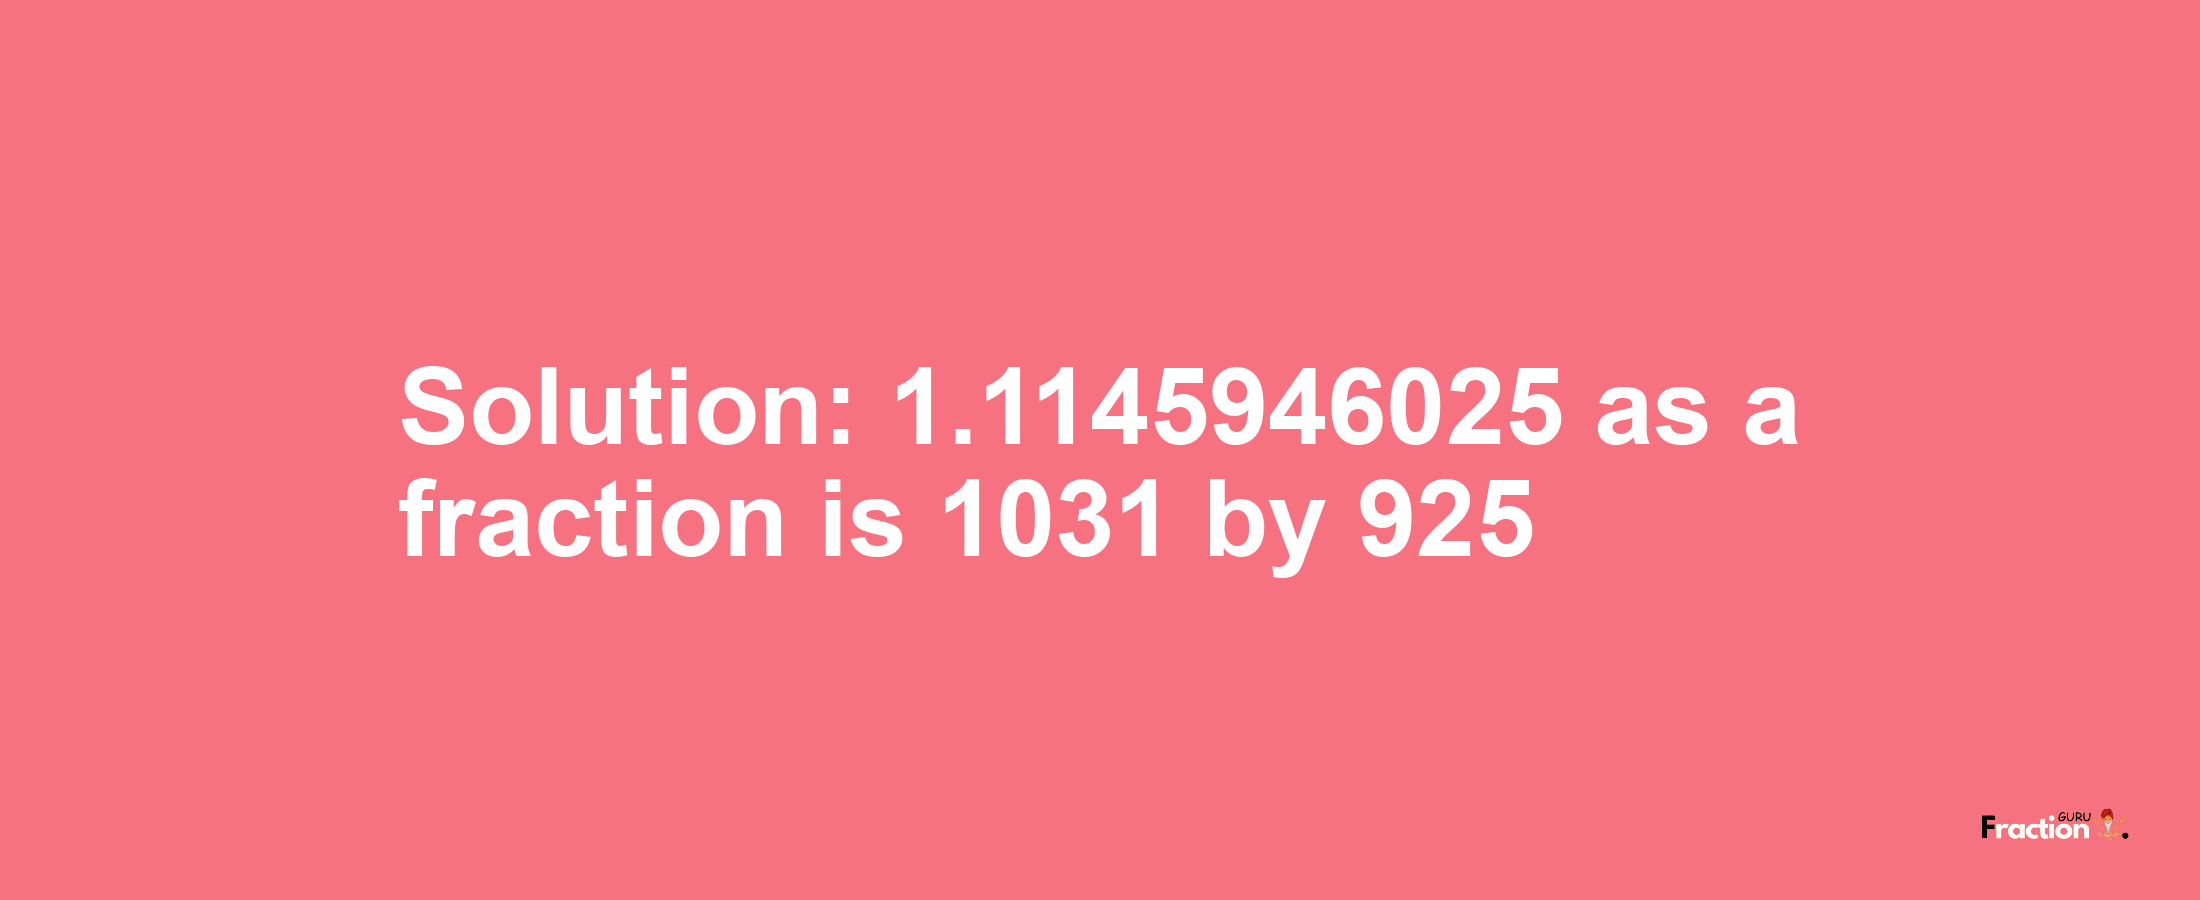 Solution:1.1145946025 as a fraction is 1031/925